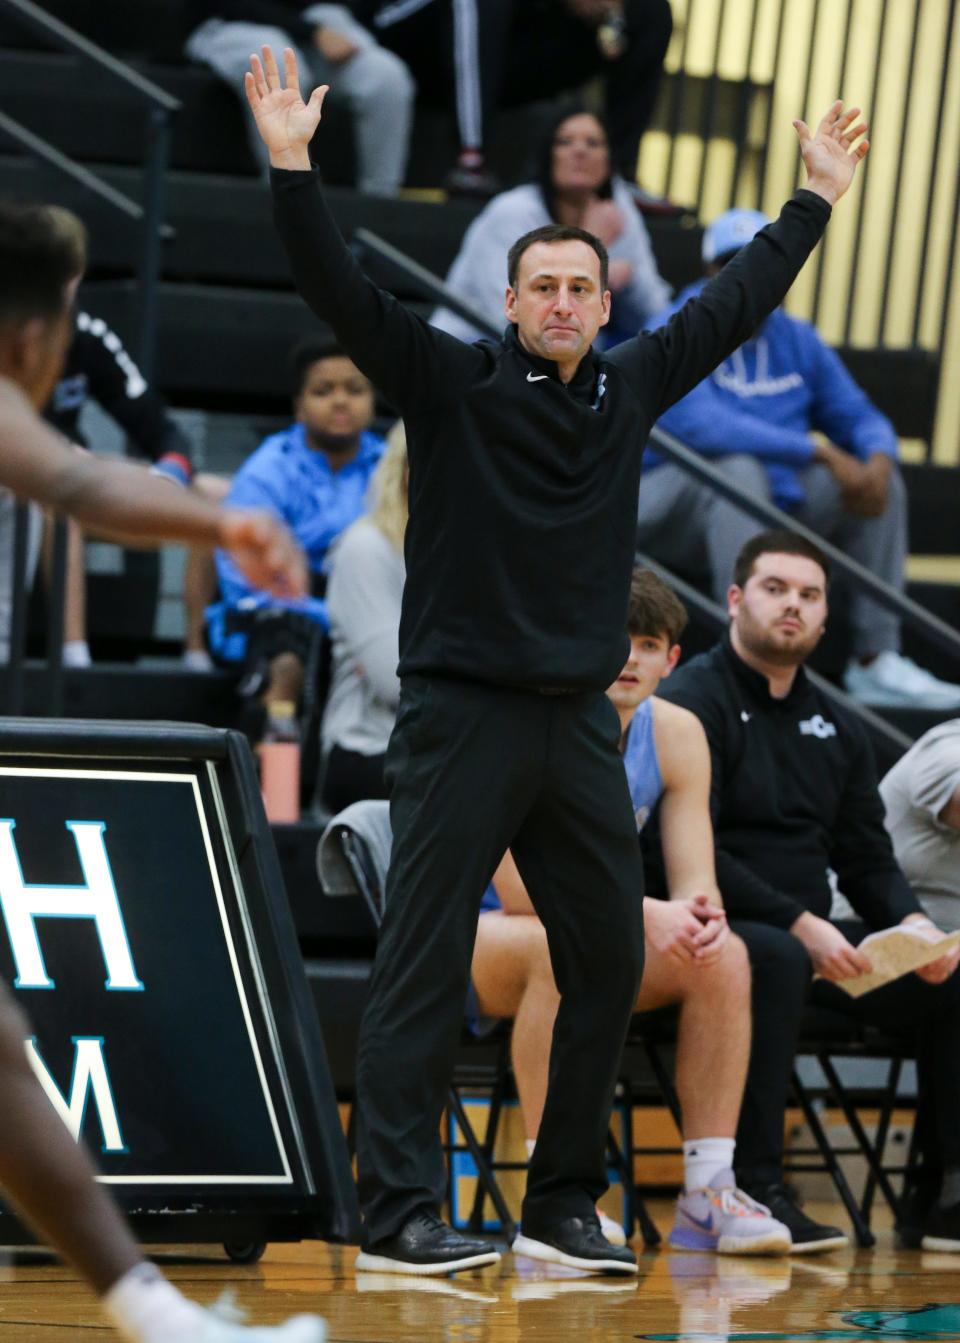 Collins head coach Chris Gaither tells his team to get their hands up on defense against North Oldham during their game at North Oldham High School in Goshen, Ky. on Feb. 14, 2023.  